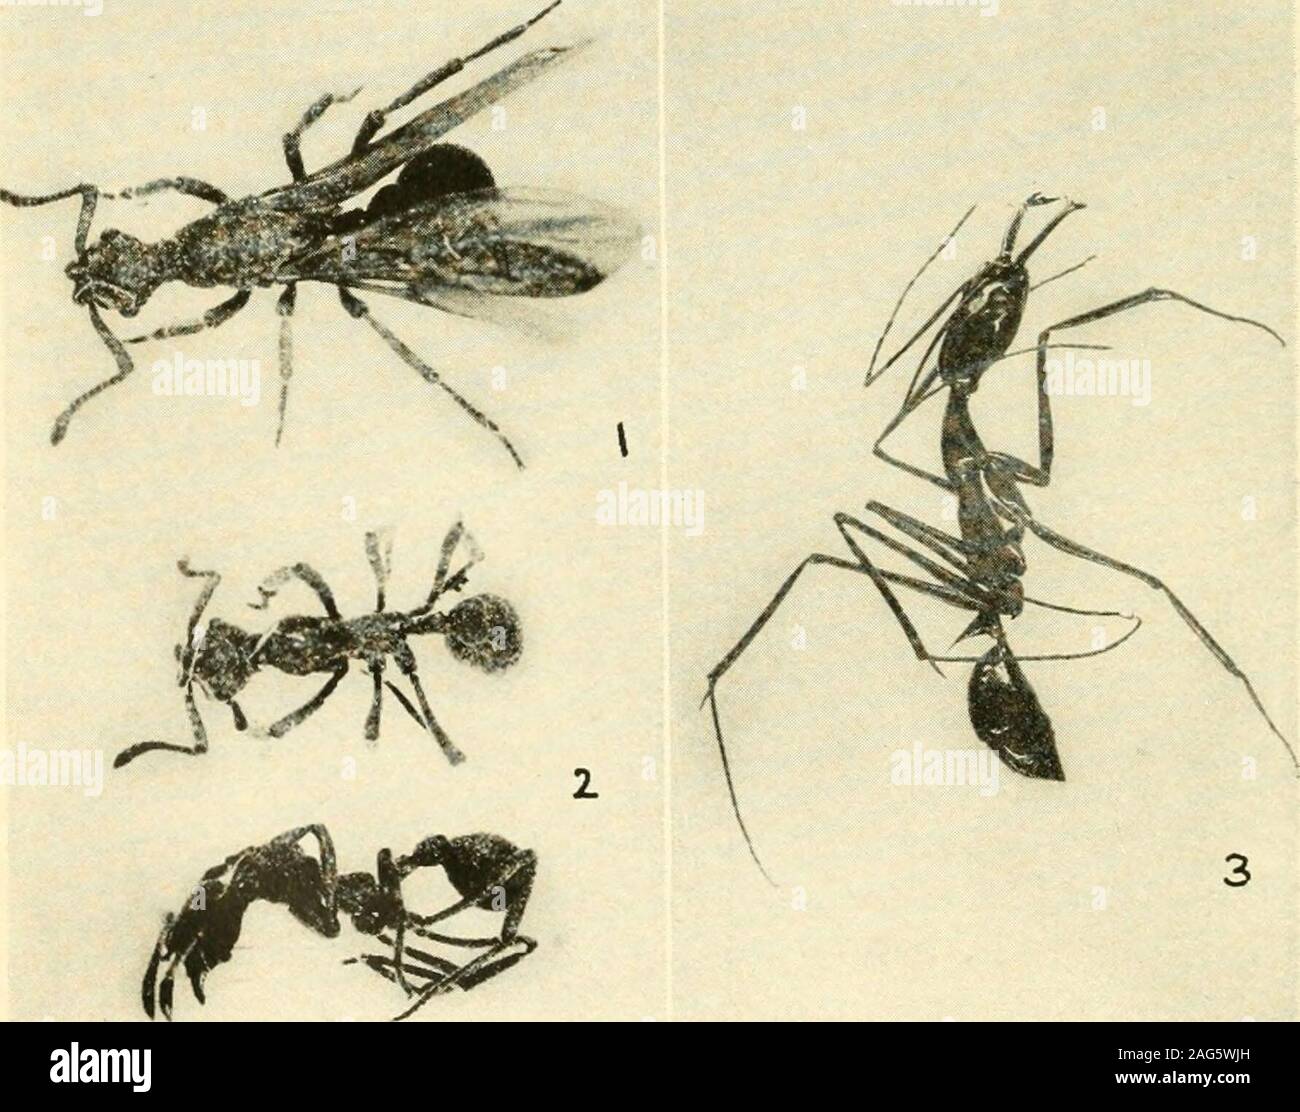 . A year of Costa Rican natural history. Bromeliads on a Branch of Poro, Cartago. Ants. I. Queen, 2. Two Workers of Apterostigma calverti. BananaRiver region. x6. 3. Odontomachus hastatus, Juan Vinas, xj. To face p. 233 JUAN VINAS—TENANTS OF BROMELIADS 233 found and there was so much still to be examined that Ileft the plants where they had fallen, and resumed the cut-ting oif of the leaves the following morning. When all thelarger ones had been removed I carried the three stocks,still so firmly united that I was unable to separate them andweighing some fifteen pounds, to the spring farther do Stock Photo